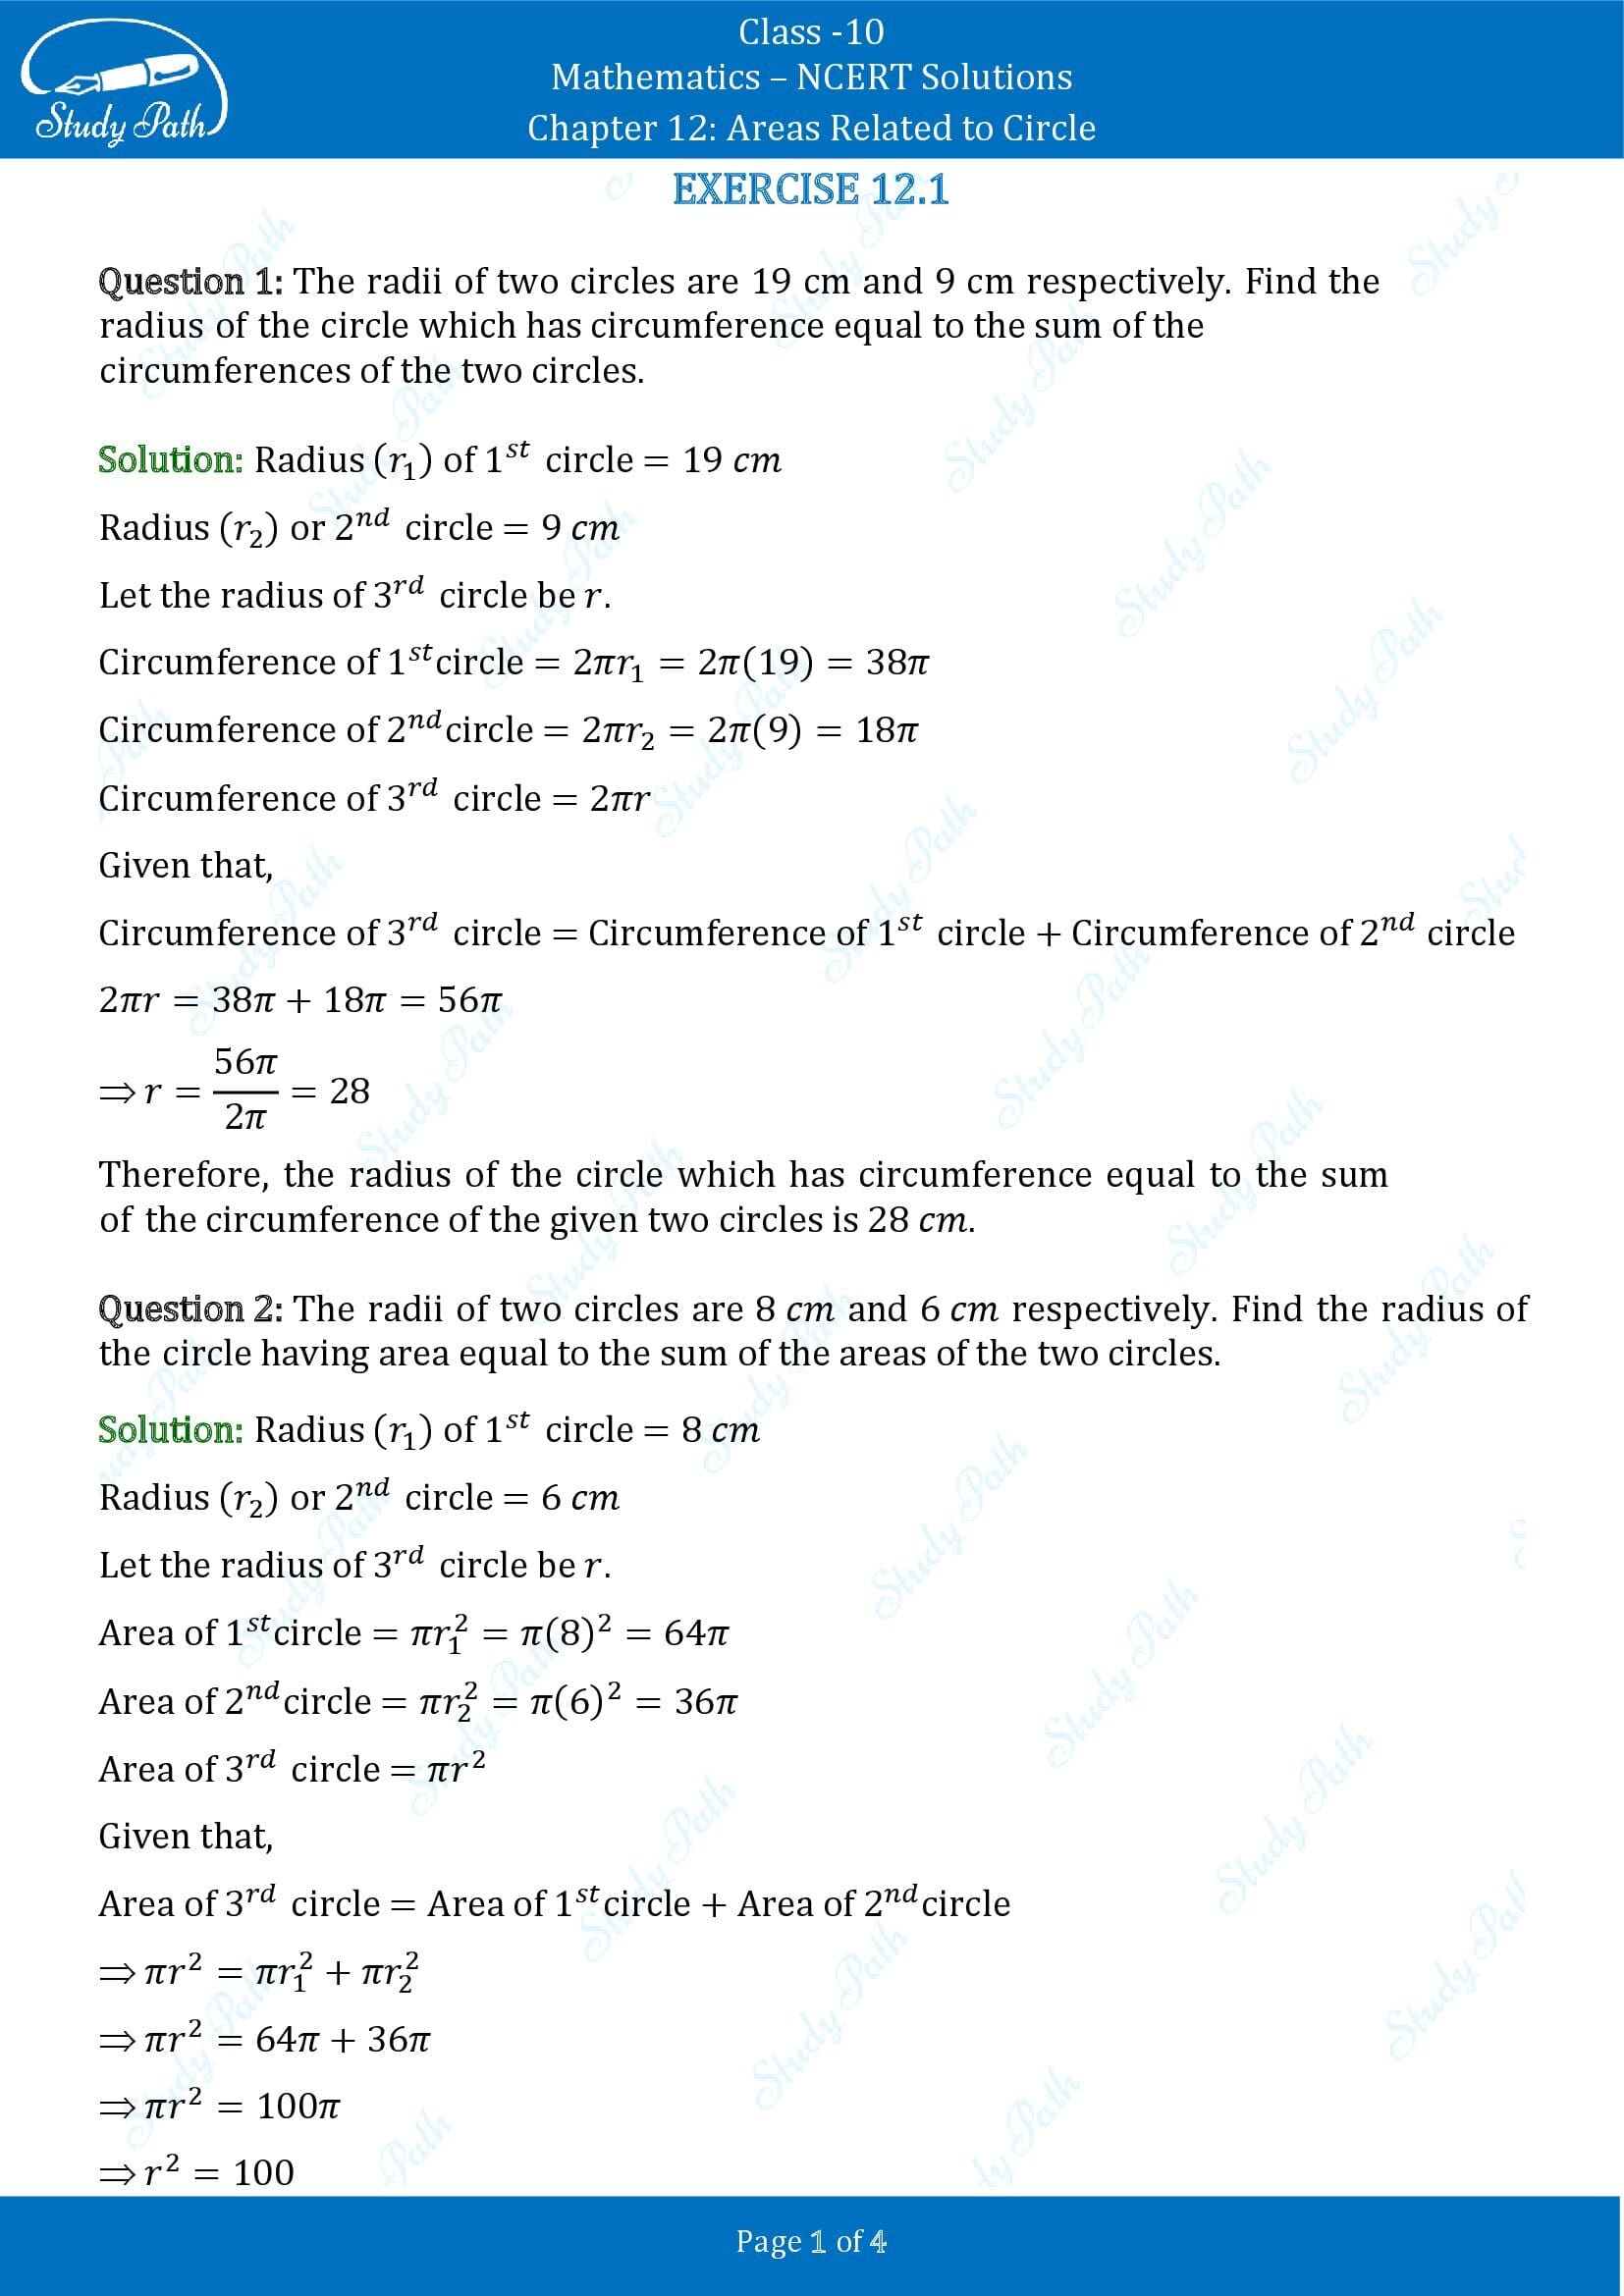 NCERT Solutions for Class 10 Maths Chapter 12 Areas Related to Circles Exercise 12.1 00001